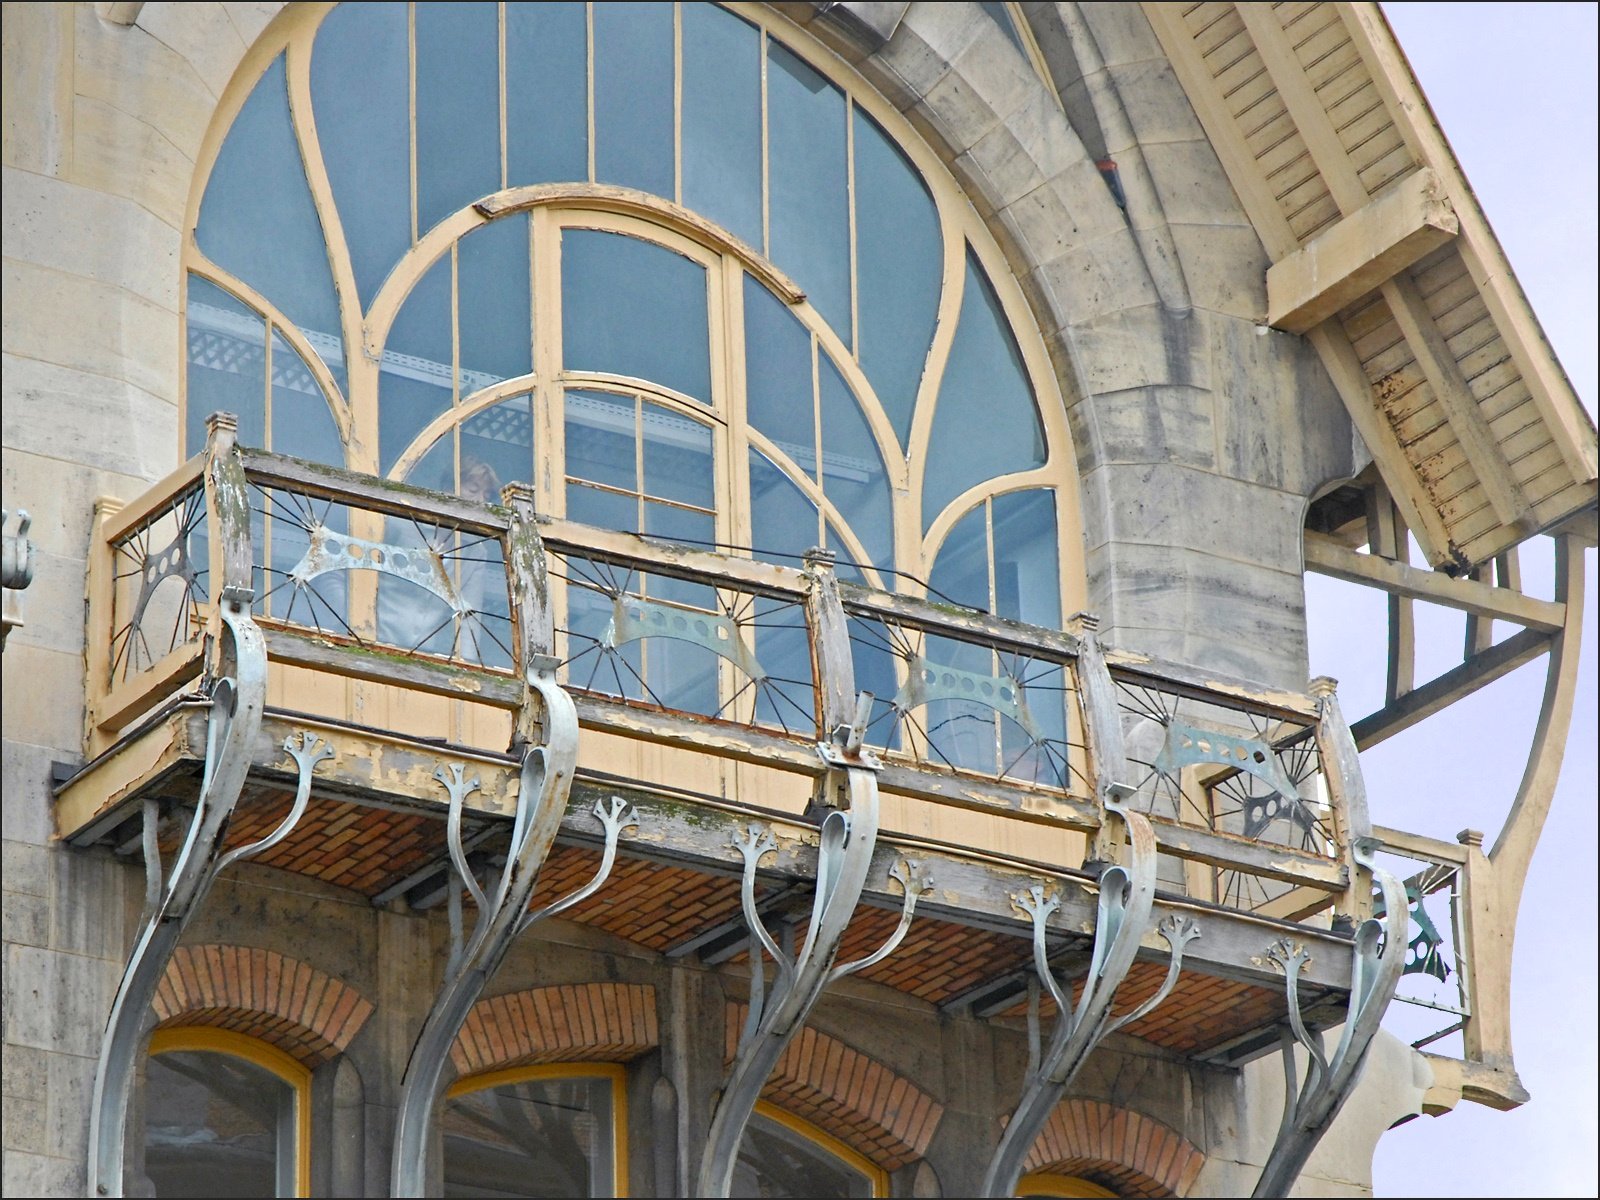 the balcony in front of the building has decorative iron railings